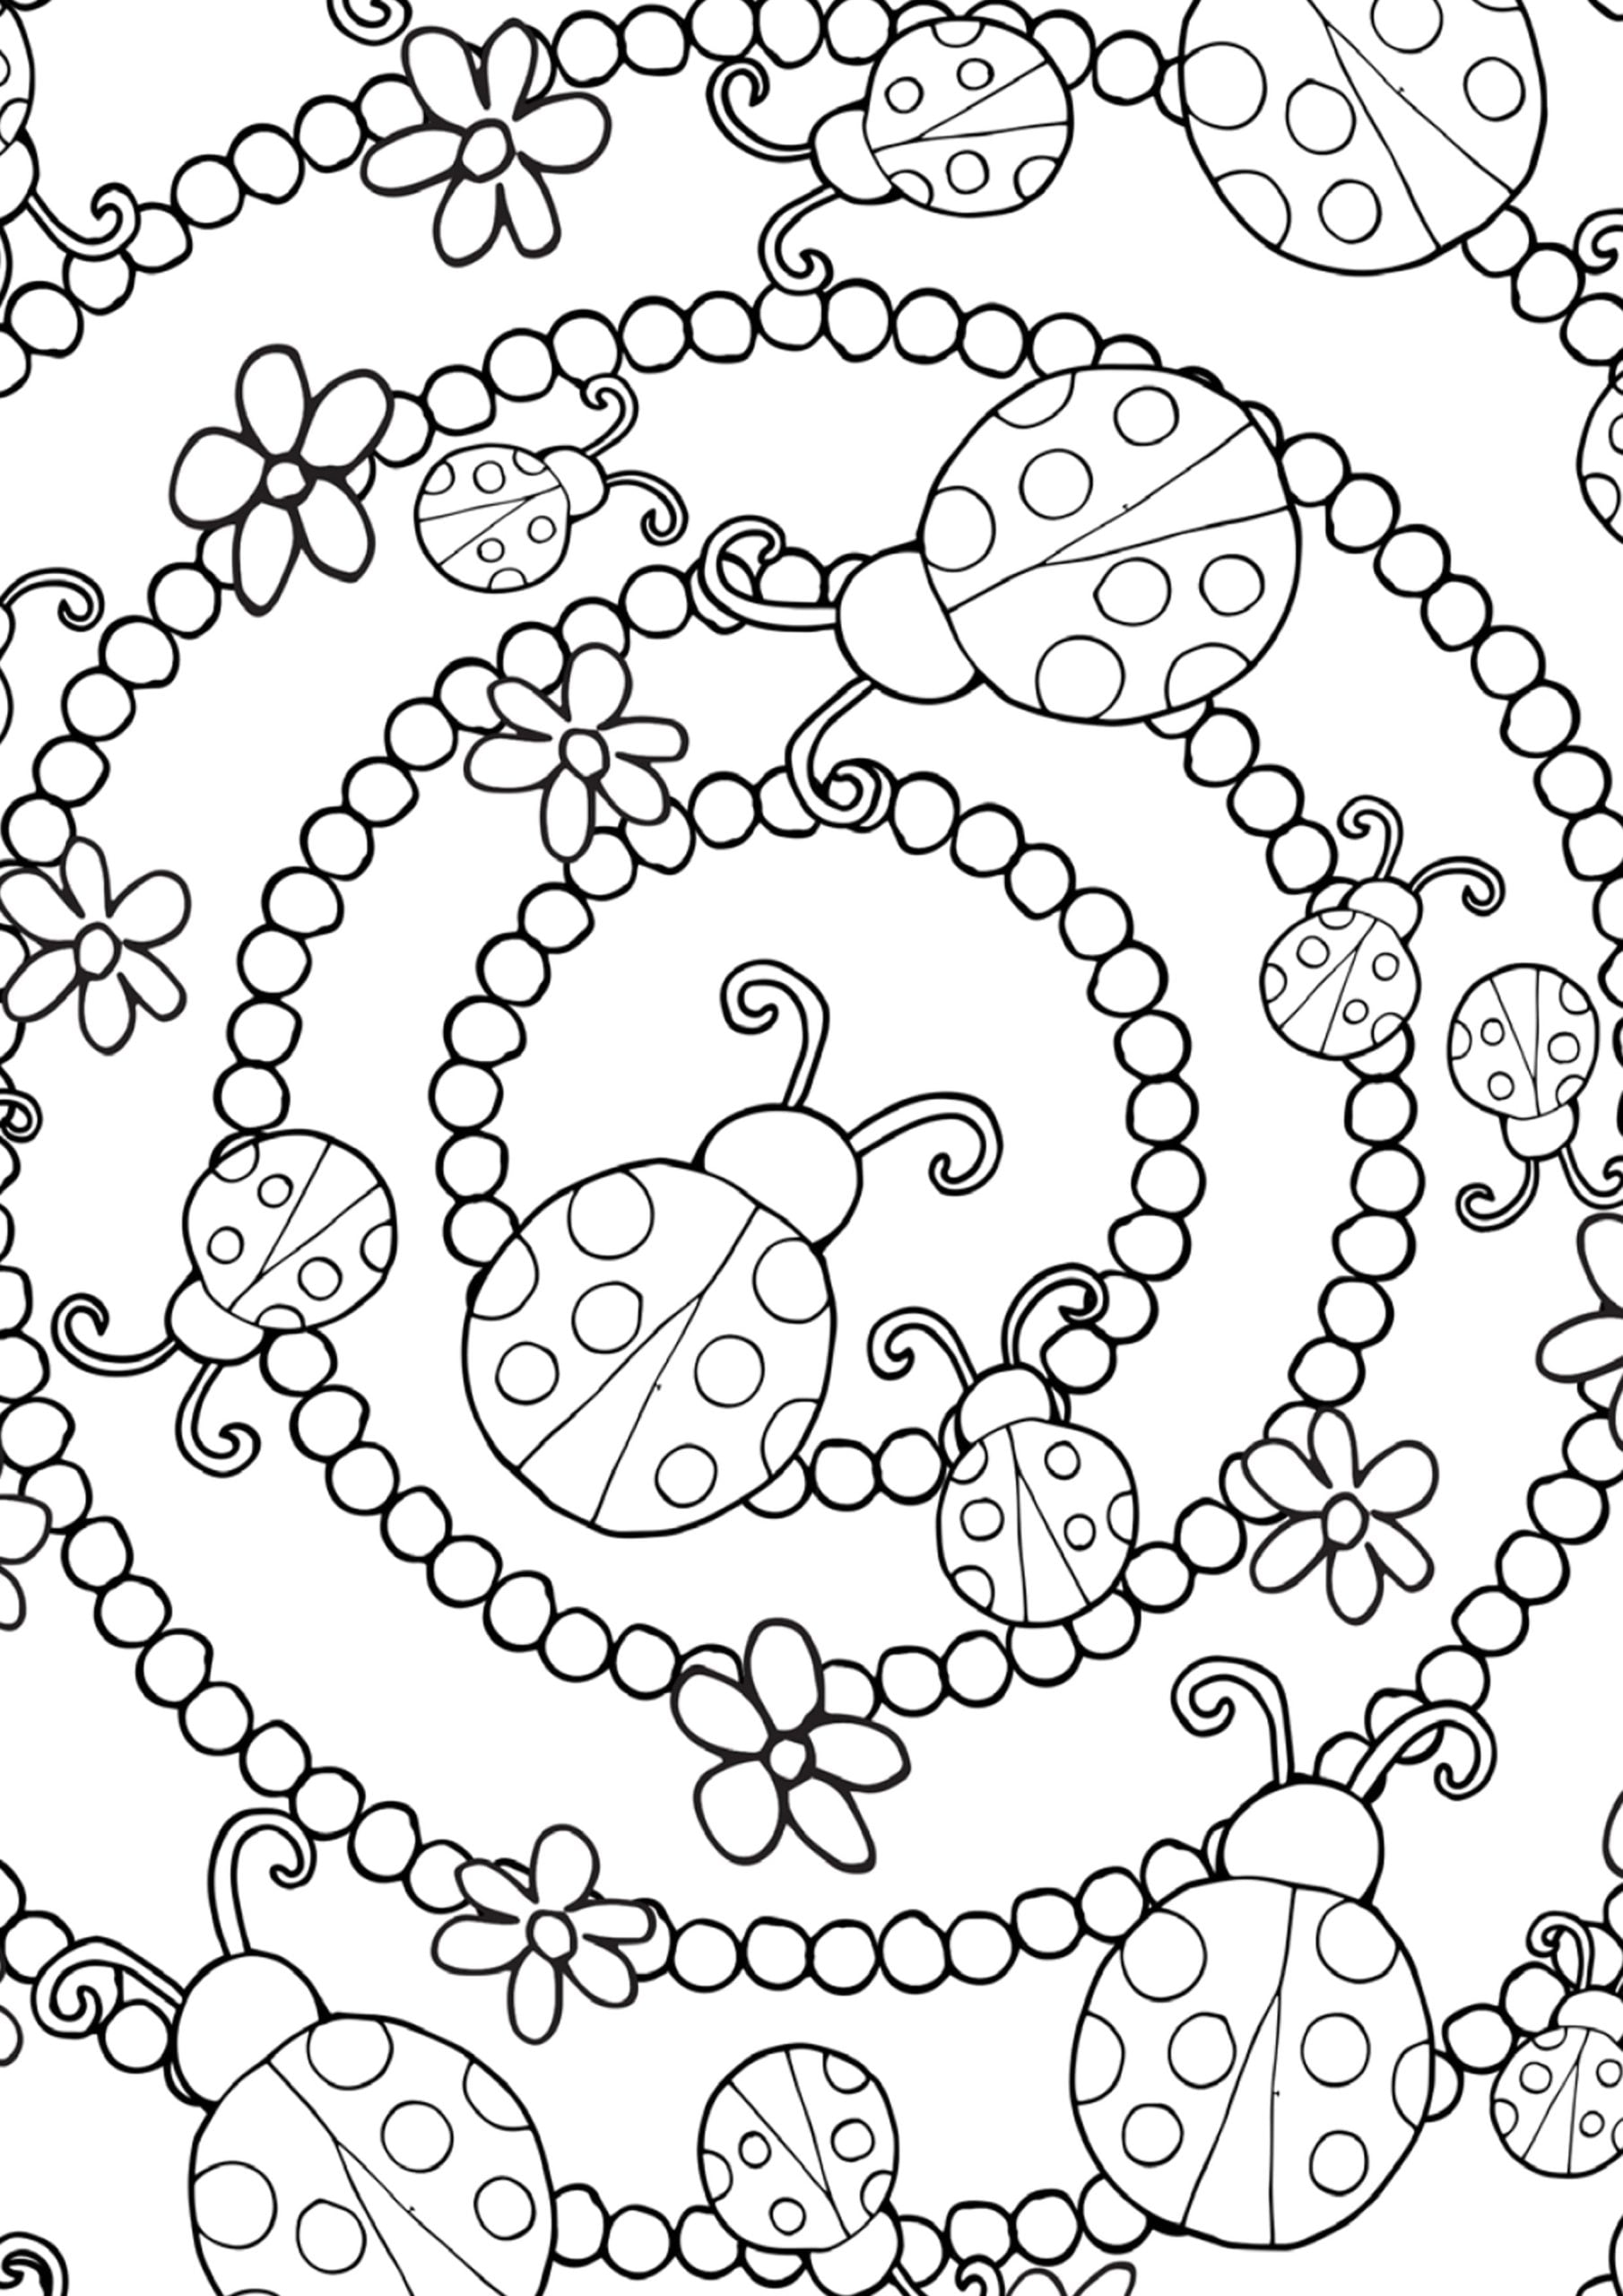 NSFW—But Safe for WFH—Printable Adults Coloring Pages